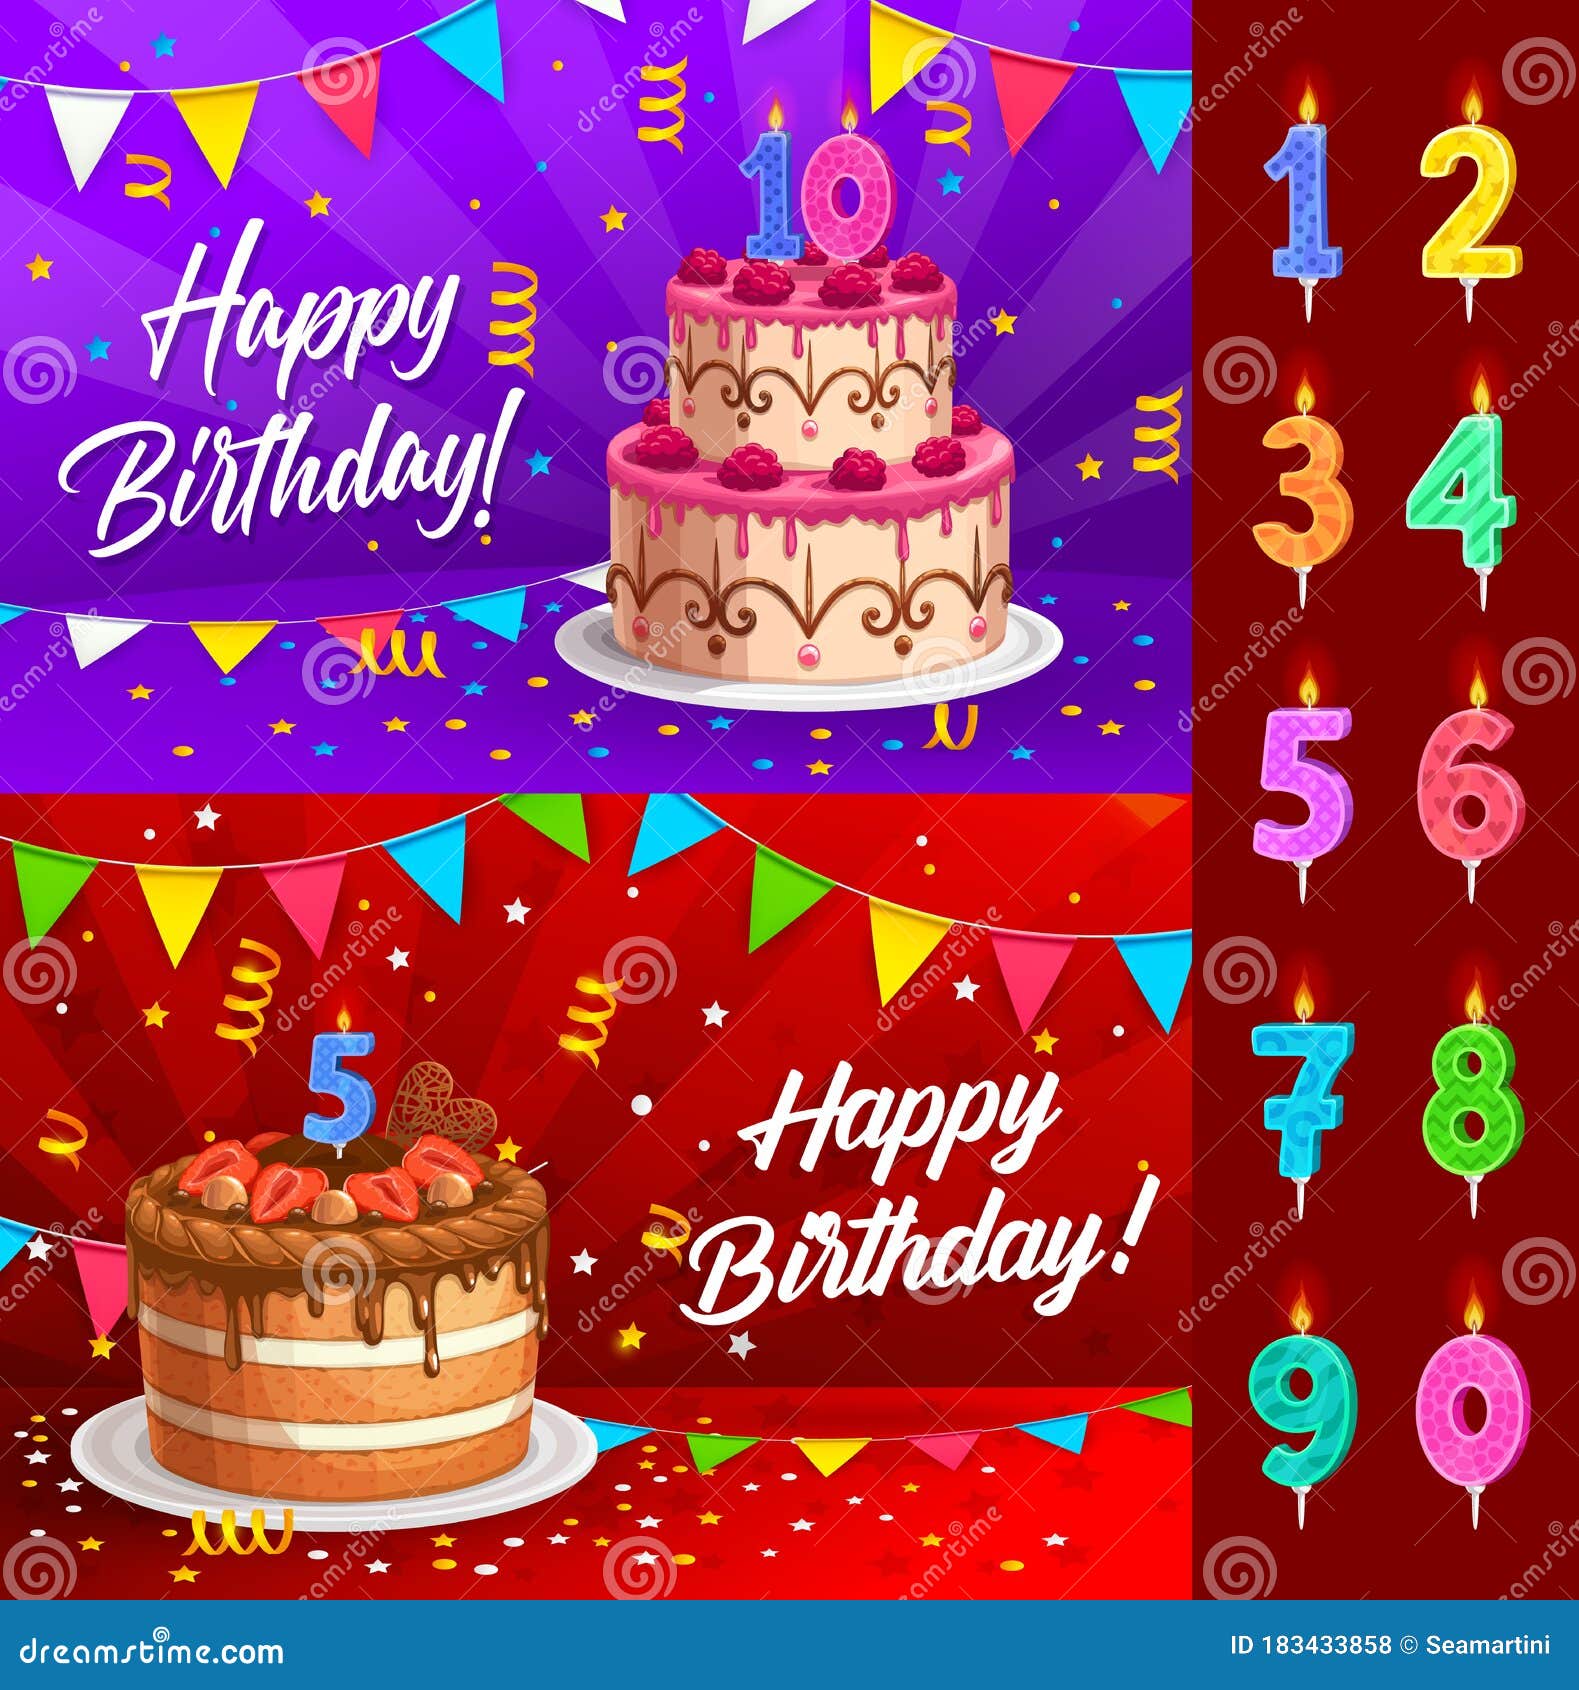 Birthday Cake With Numbered Candles Greeting Card Stock Vector ...